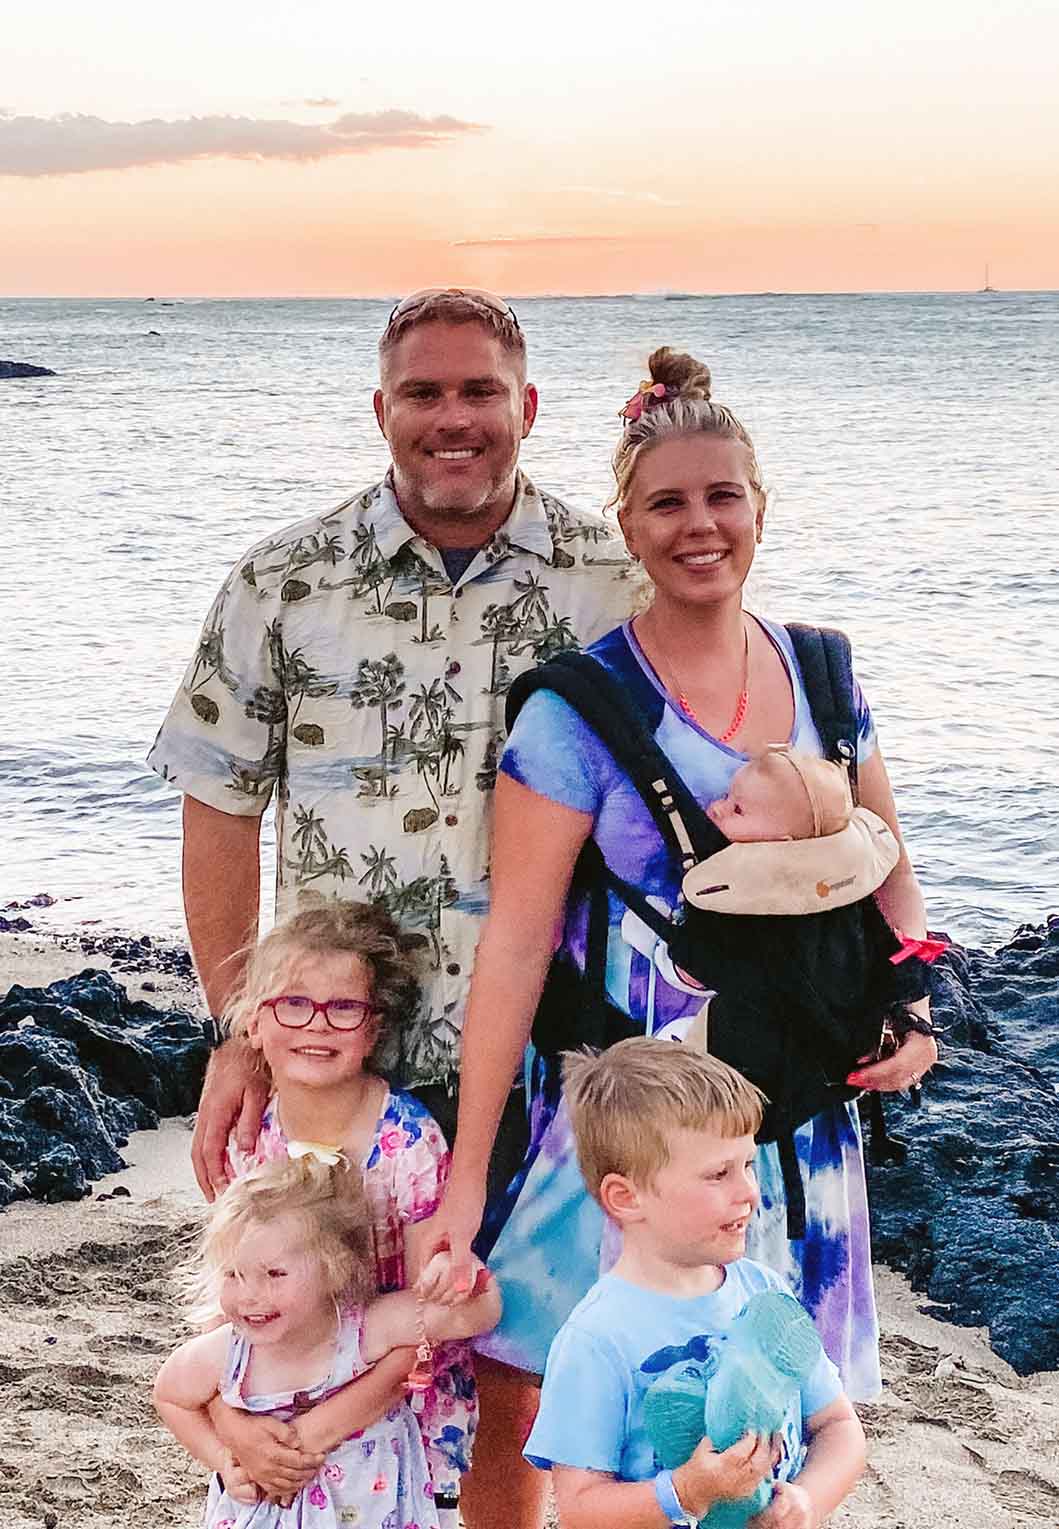 Lindsey Gilmore, RN and Marquette Method Instructor in Hawaii with her Family (including 6 week old newborn!)
